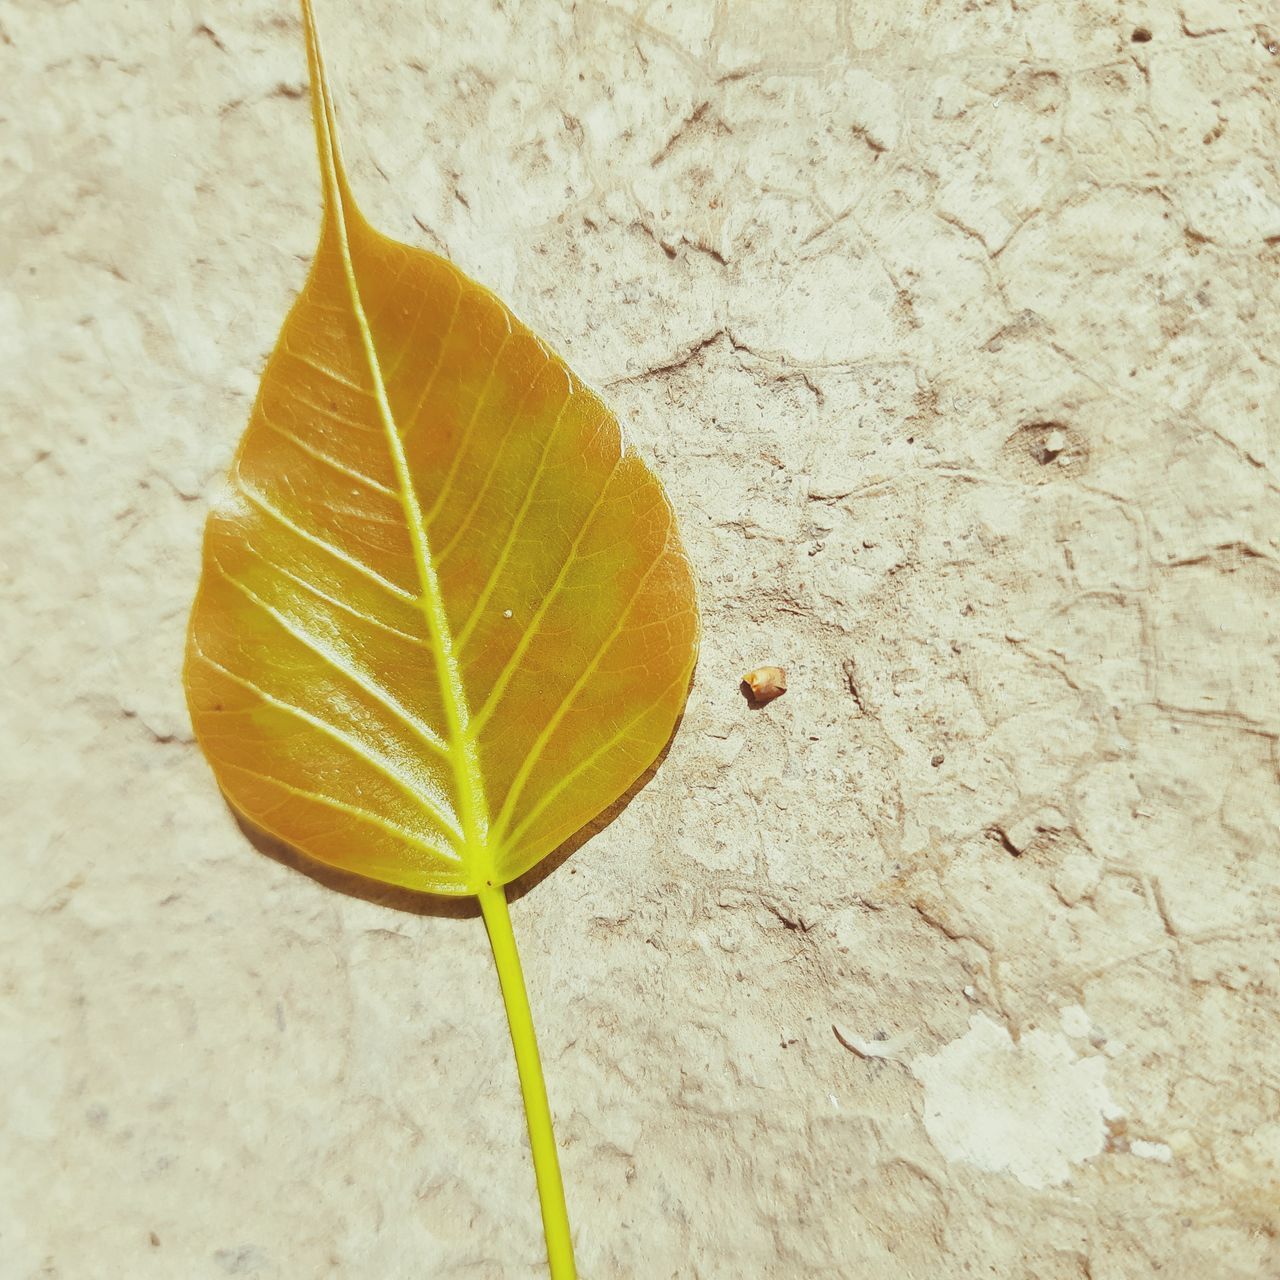 CLOSE-UP OF YELLOW LEAF ON PLANT